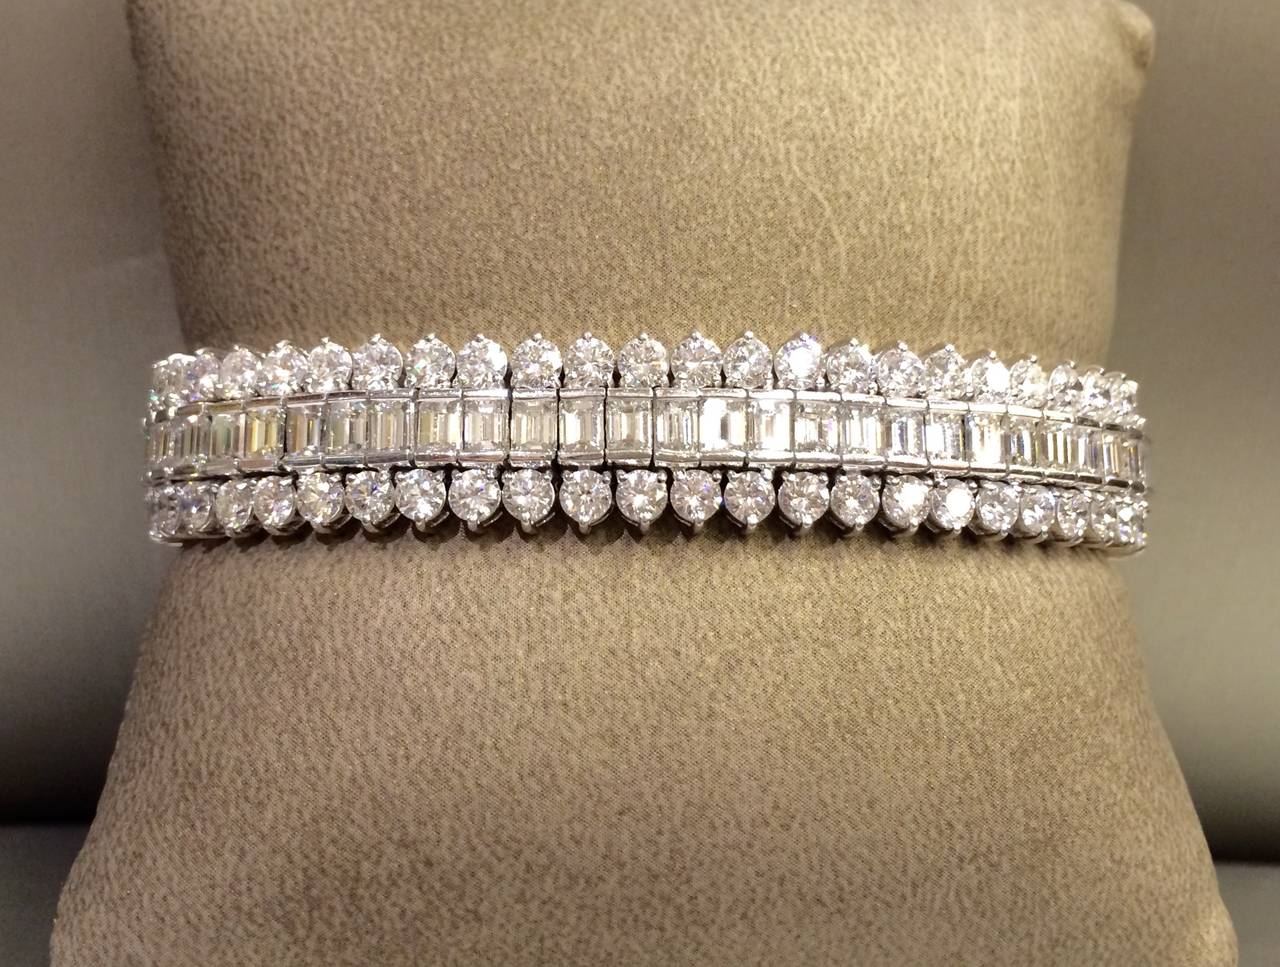 Fancy link diamond bracelet in platinum with round brilliant cut diamonds and emerald cut diamonds. Carat total weight approximately 29.00.